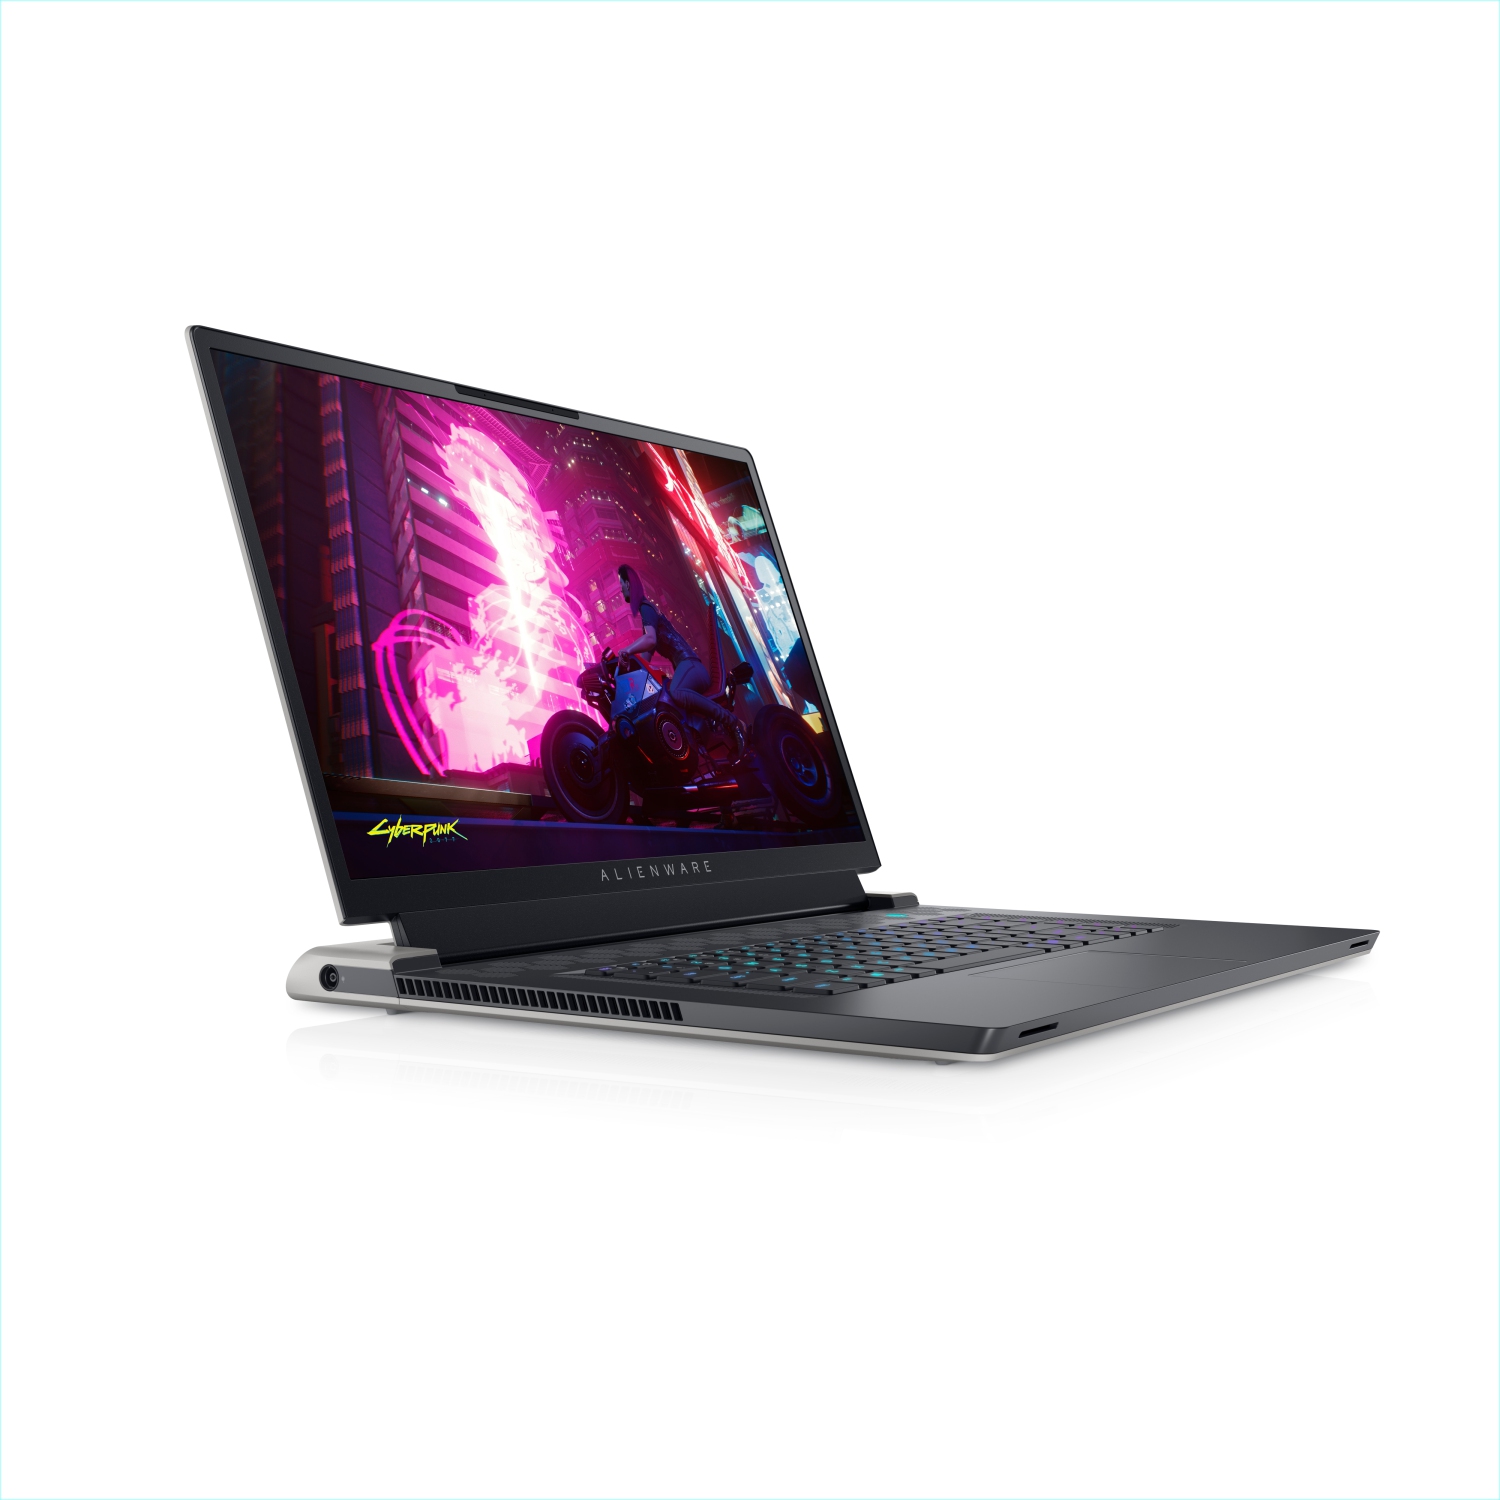 Refurbished (Excellent) - Dell Alienware X17 R1 Gaming Laptop (2021), 17.3" FHD, Core i7 - 256GB SSD + 256GB SSD - 32GB RAM - RTX 3060, 4.6 GHz - 11th Gen CPU Certified